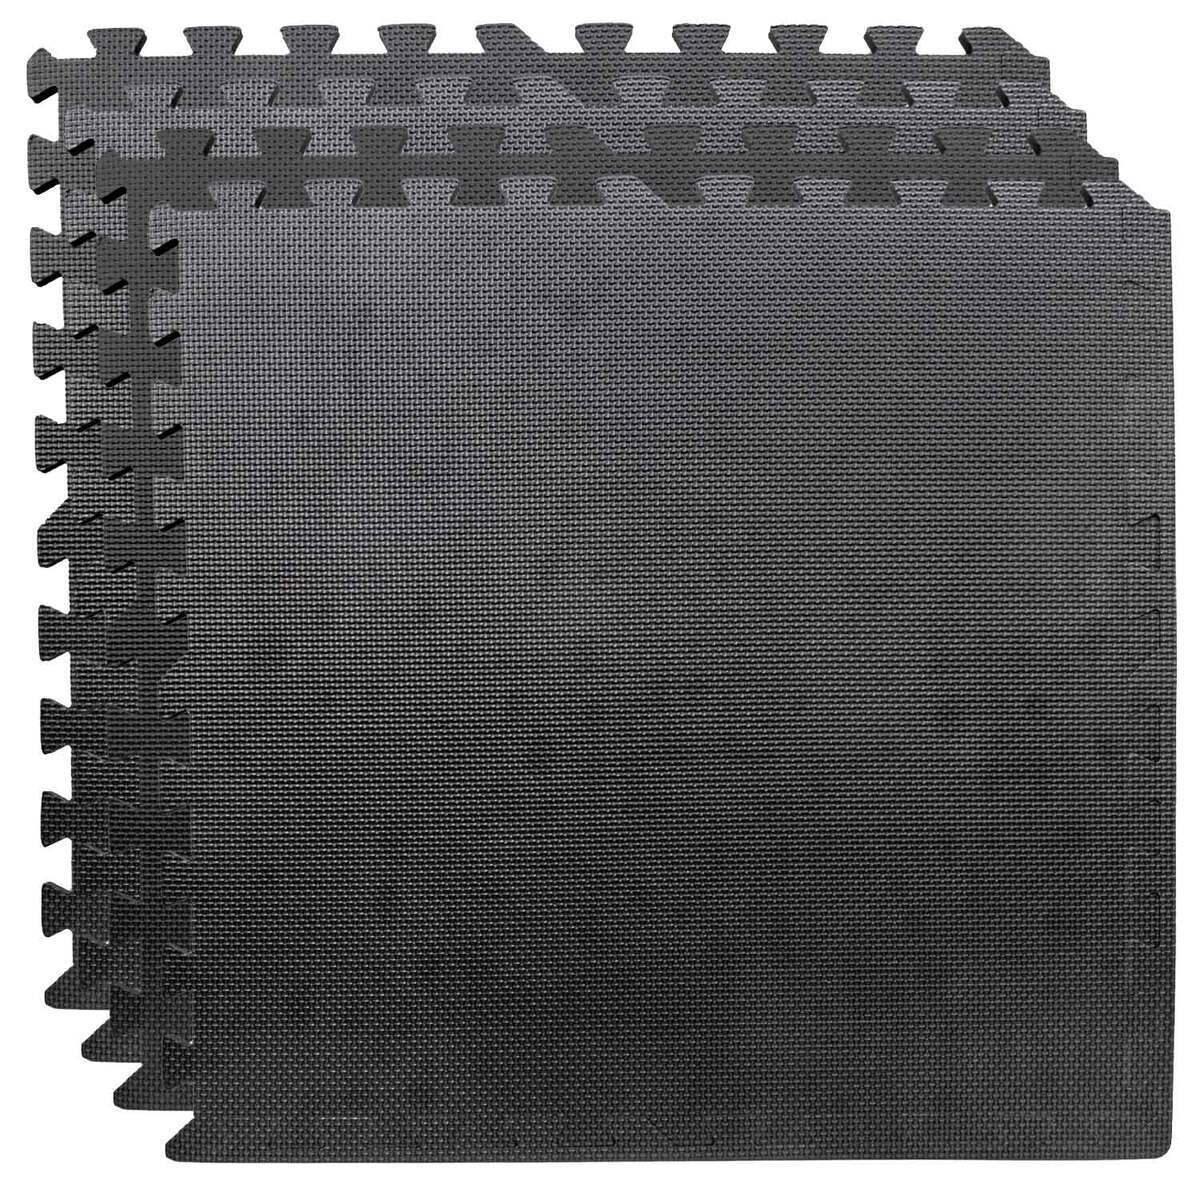 Lost Creek Ice Shelter Floor Mats Ice Fishing Shelter Accessory - Black by Sportsman's Warehouse